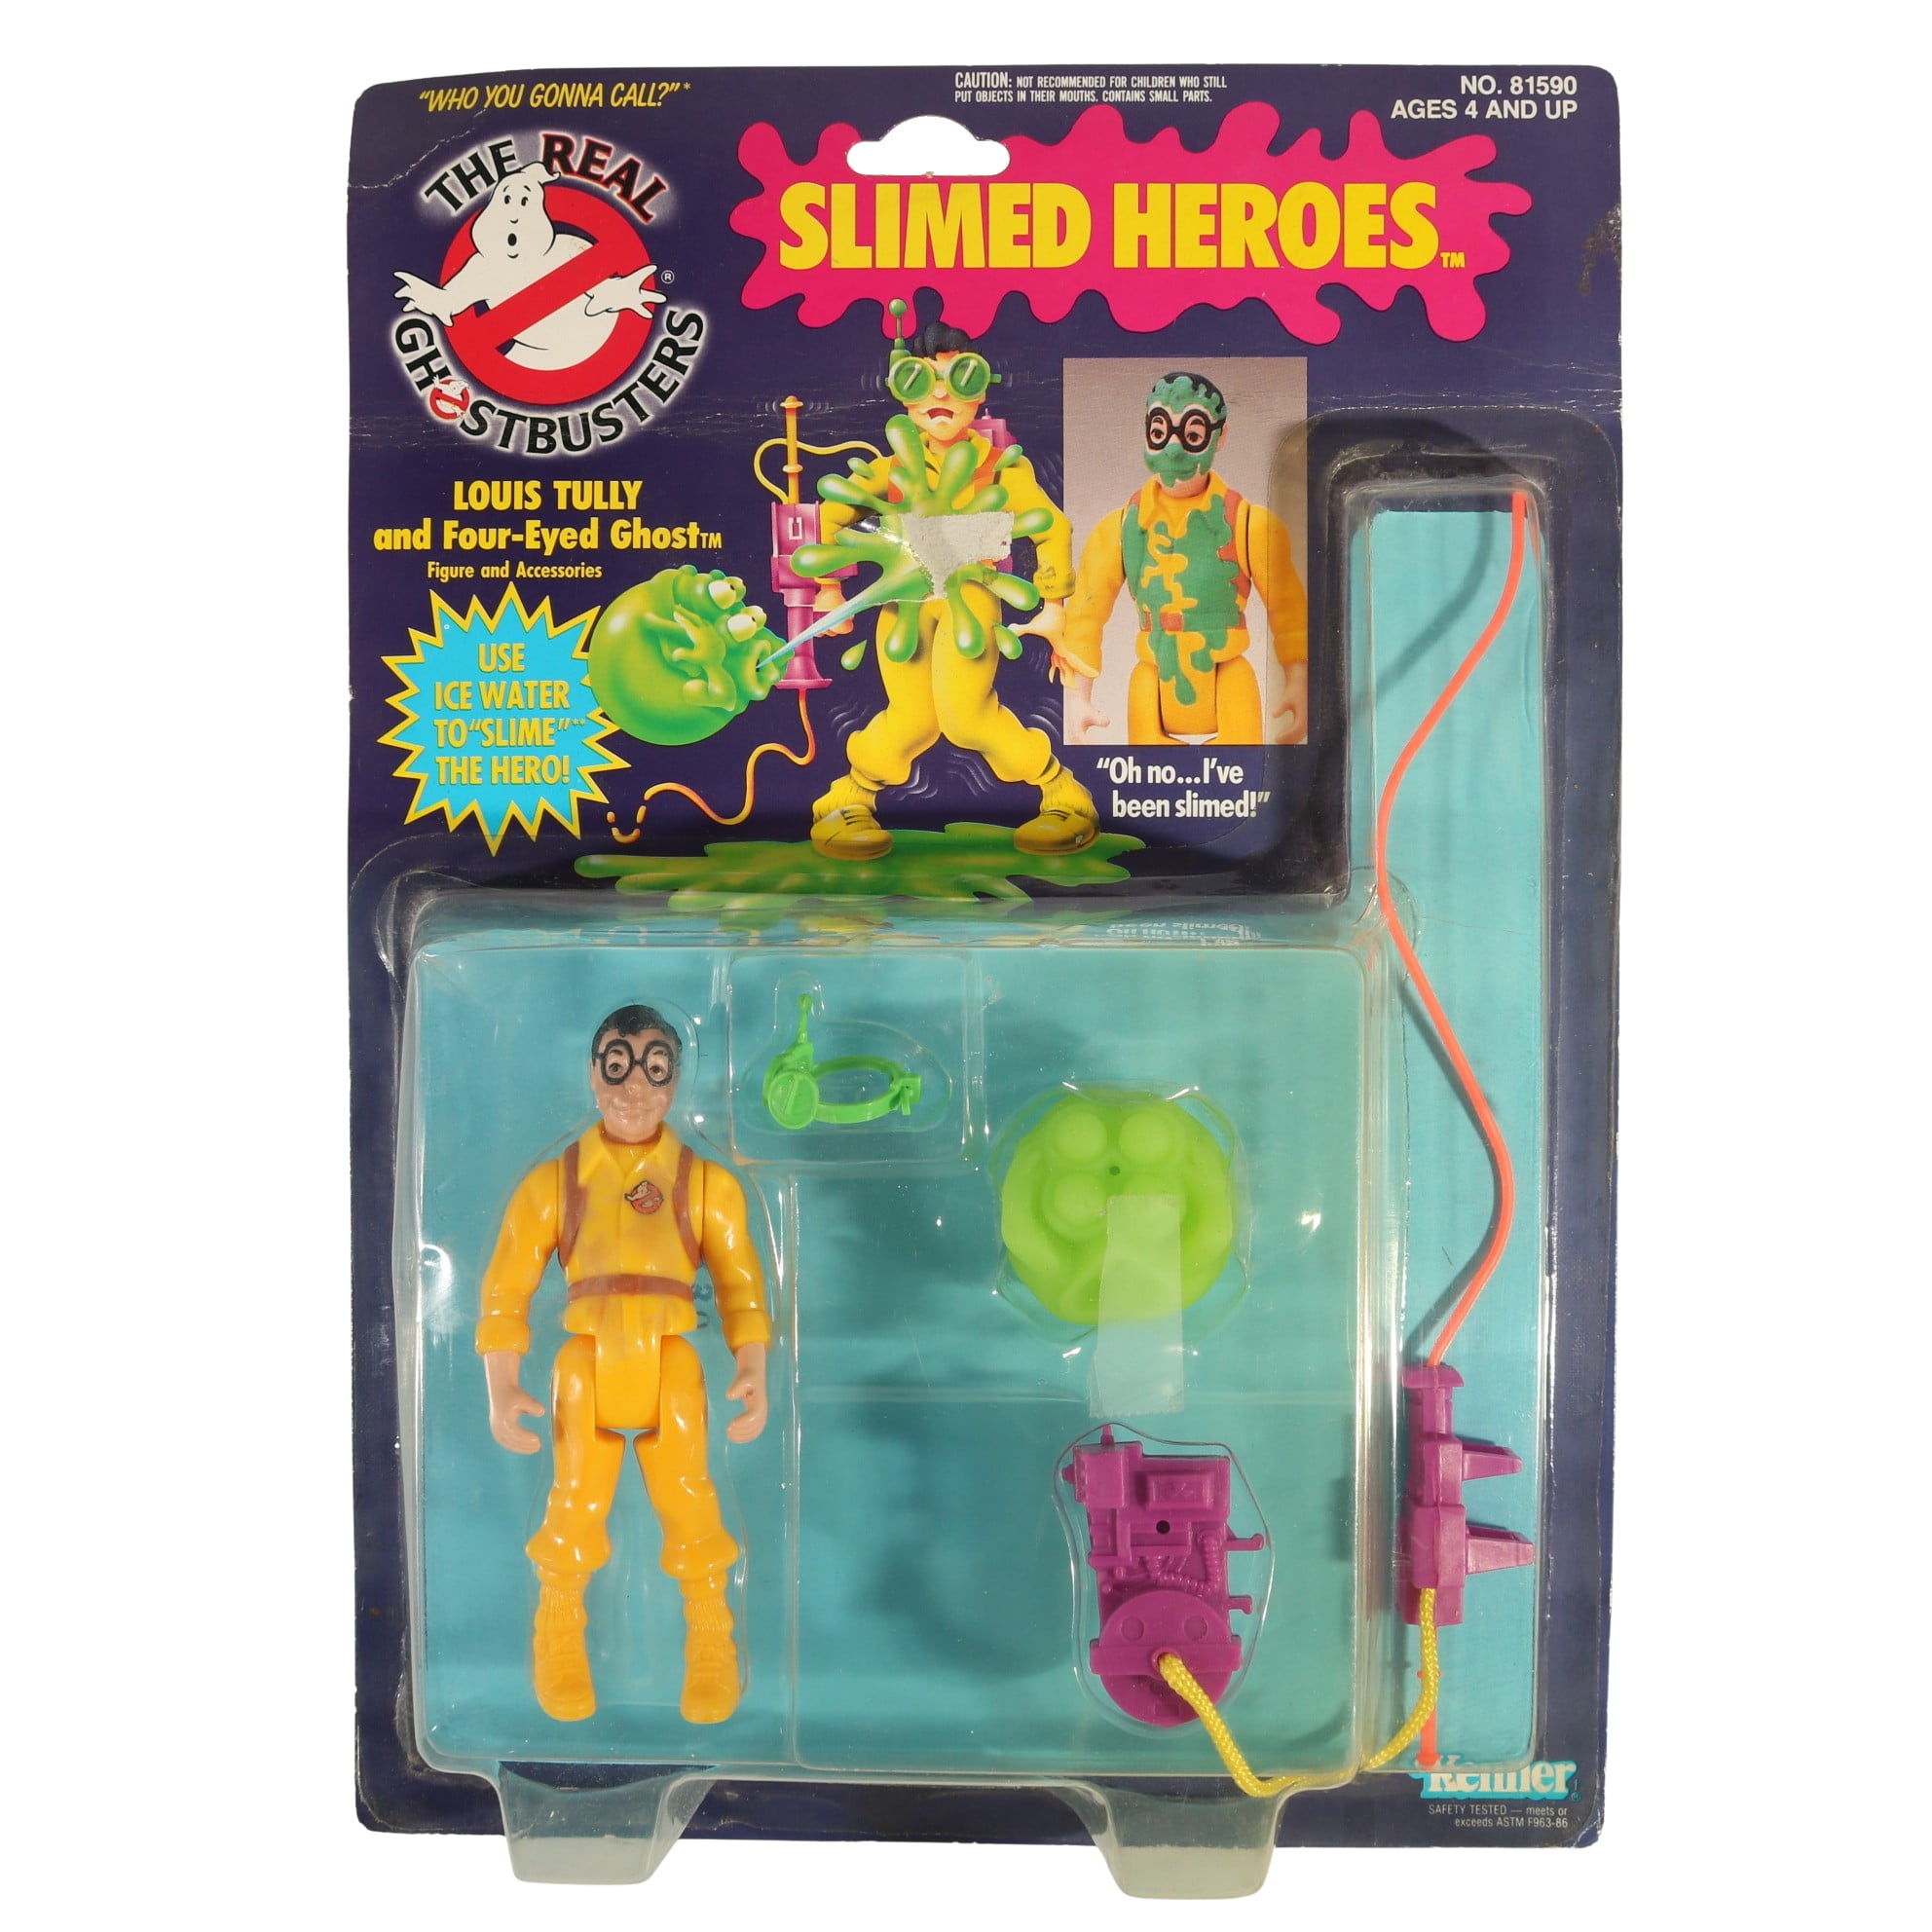 1986 Kenner The Real Ghostbusters Carded Action Figure - Slimed Heroes  Louis Tully with Four-Eyed Ghost